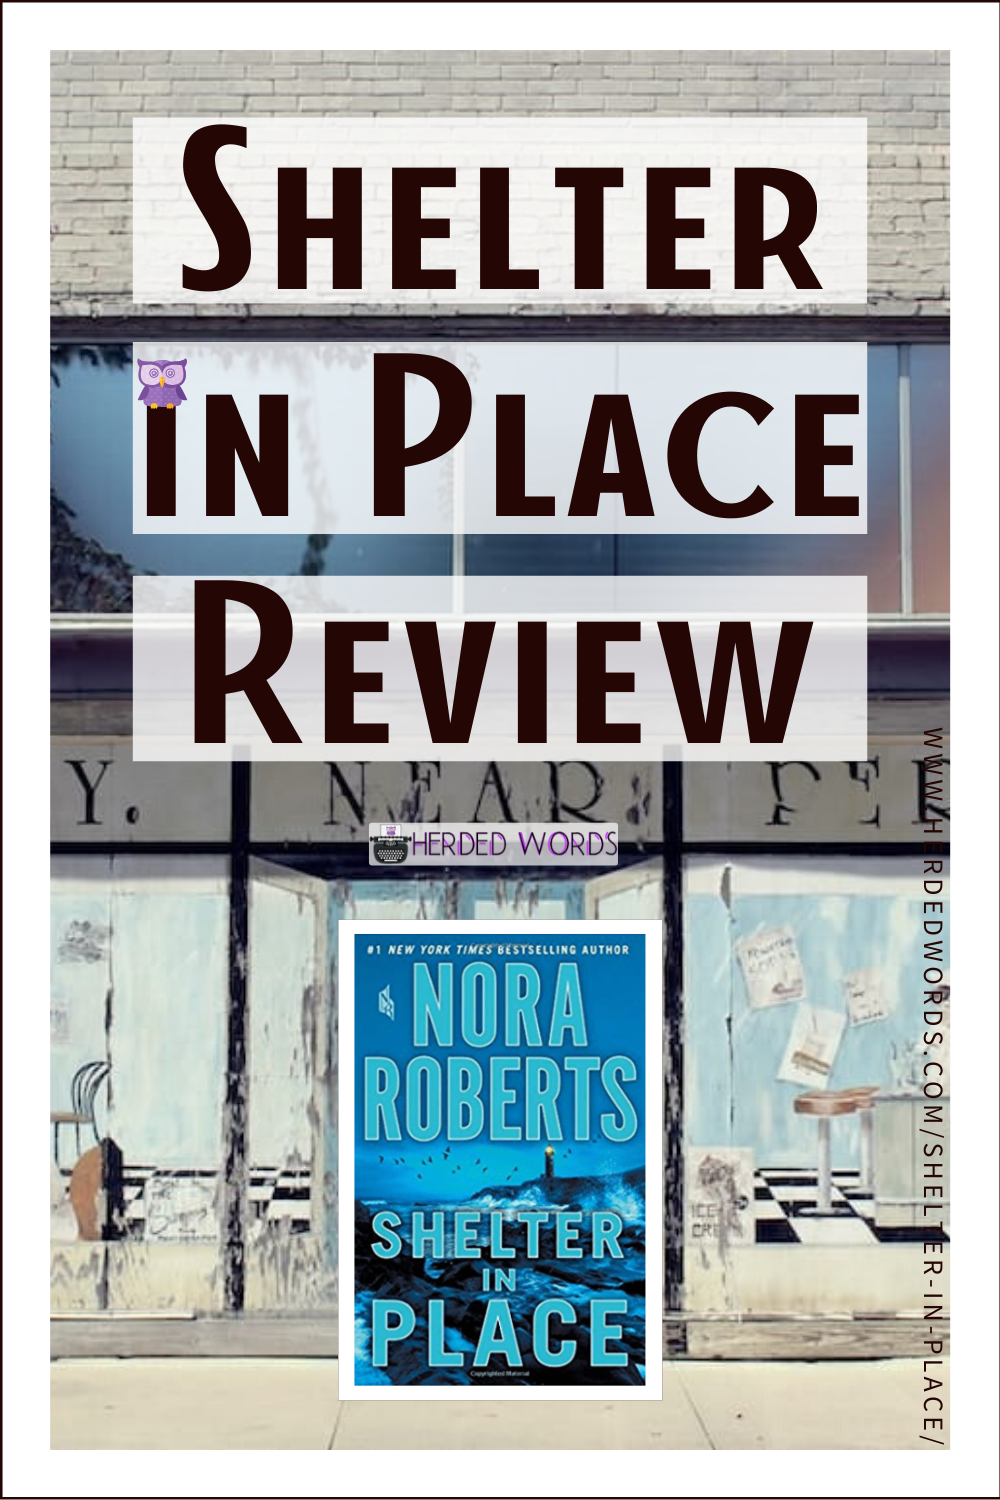 Pin This: Book Review & Analysis of SHELTER IN PLACE